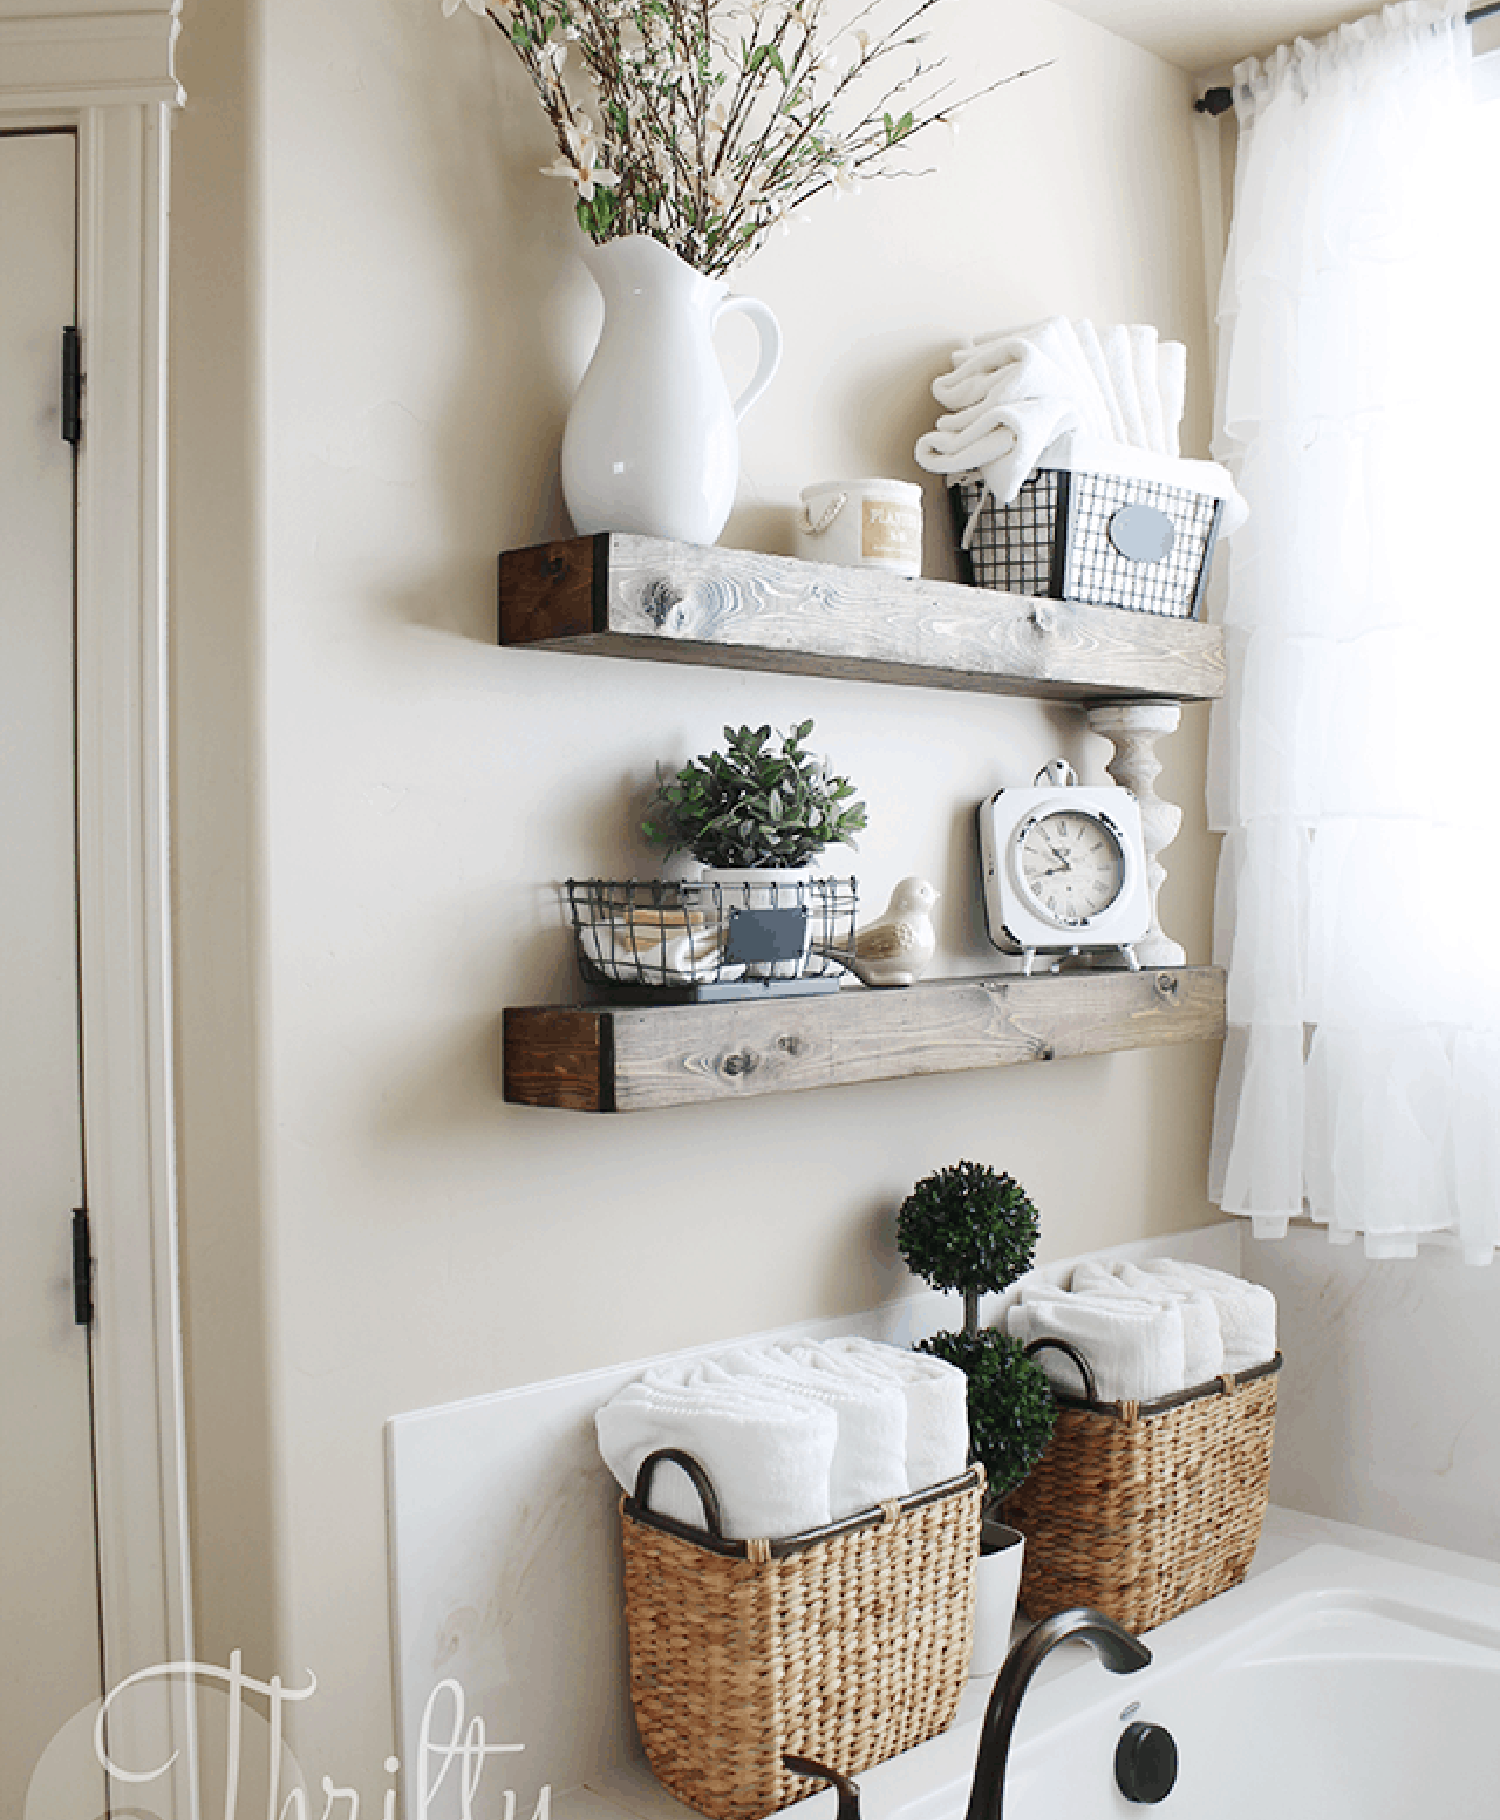 Floating wood shelves and woven baskets used for bathroom storage.